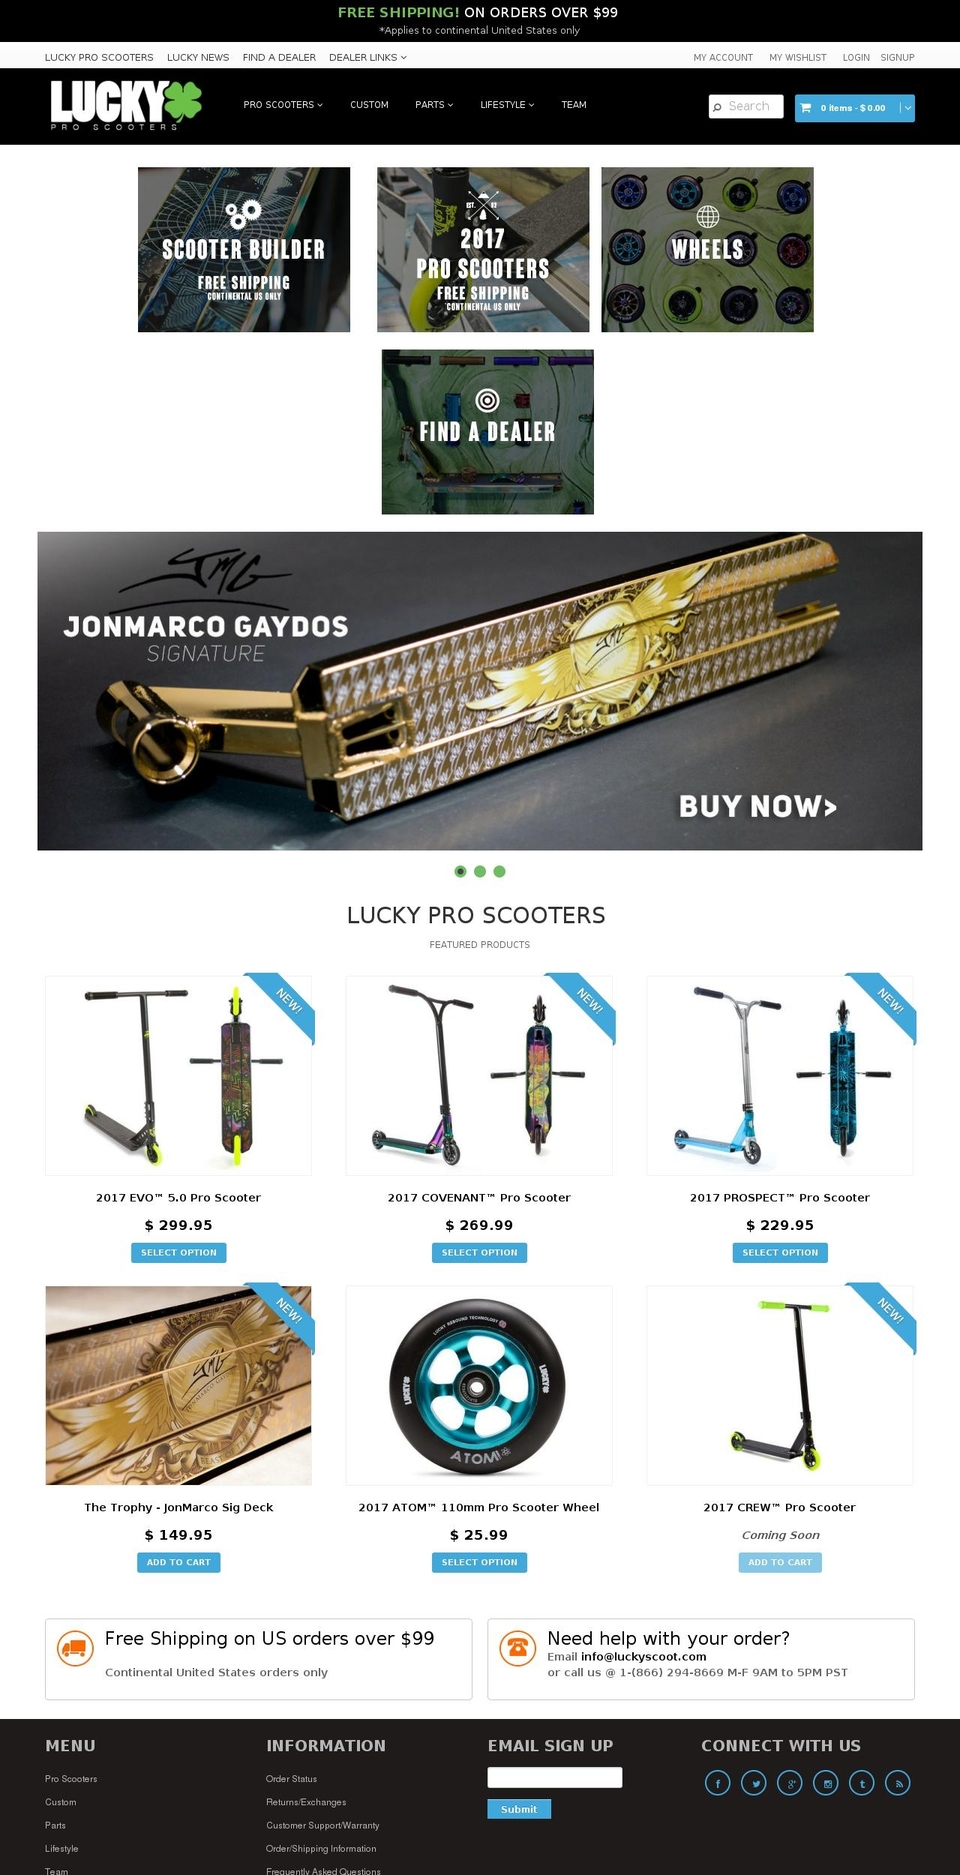 Lucky Scooters Live Theme 2-17-2017 Shopify theme site example lucky-scooters.com